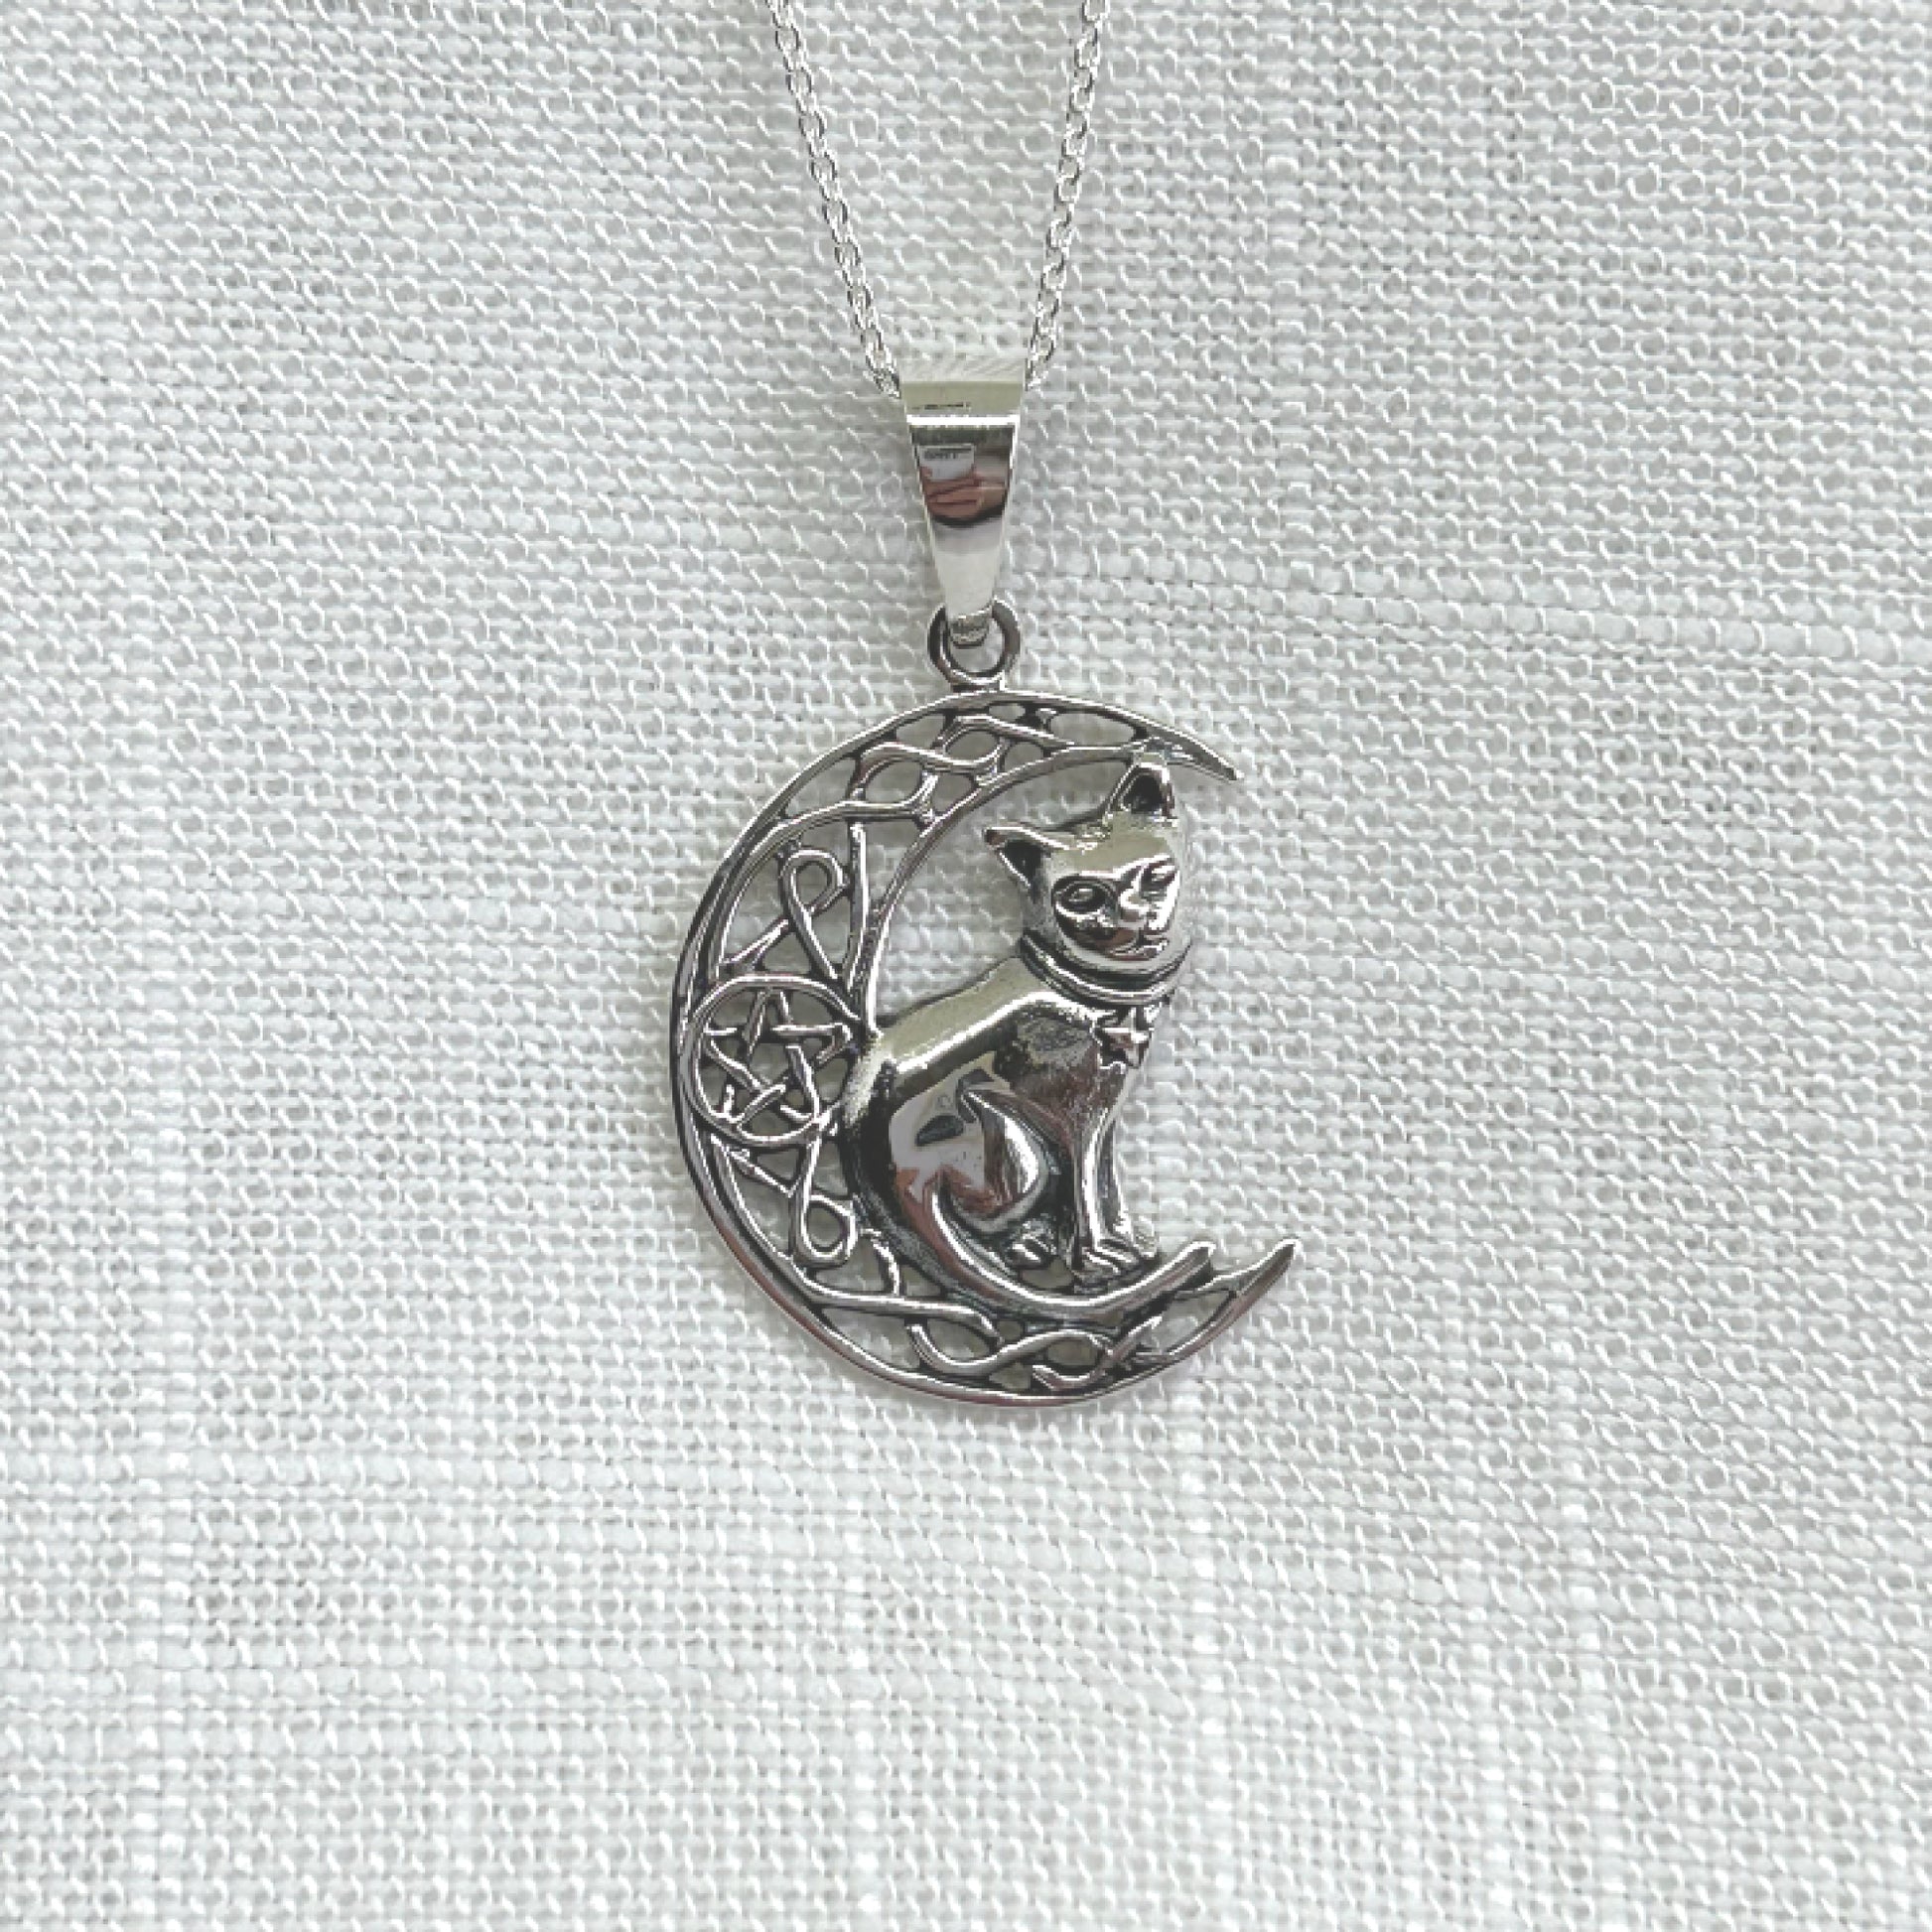 Delicately crafted in 925 silver with a detailed cat and moon, this necklace is sure to make a unique statement of wisdom, fate, and divination. It features an intricate Celtic knot style crescent moon with a pentacle within the centre and a cat sitting on the crescent. The pendant is approximately 3.6cm long including the bale by 2.3cm wide. Total weight is 5.9g. Matching earrings are also available.